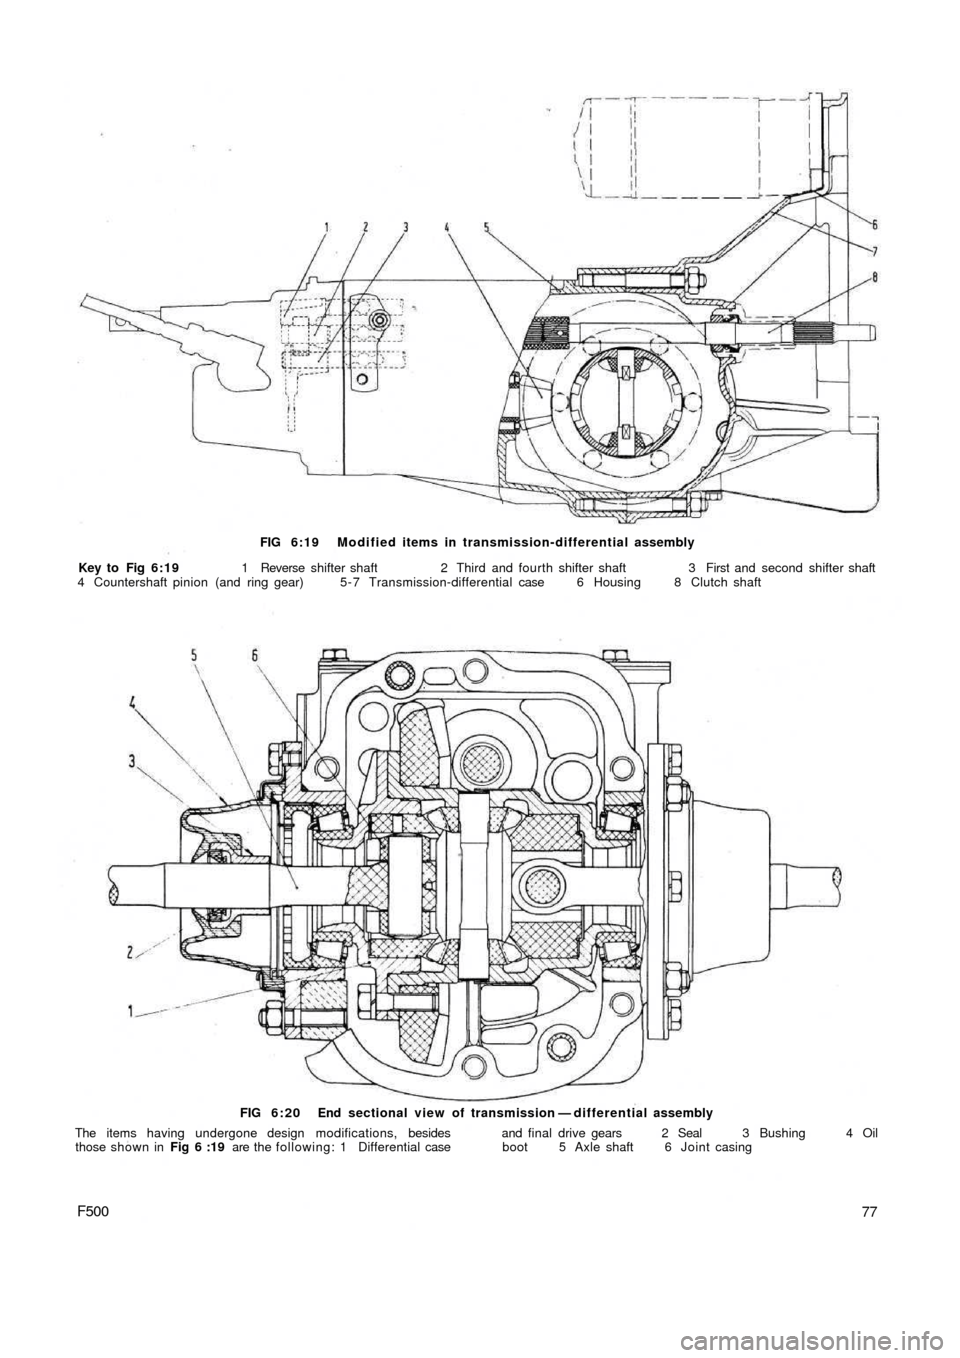 FIAT 500 1971 1.G Repair Manual FIG 6:19 Modified items in transmission-differential assembly
Key to  Fig  6:19 1 Reverse shifter shaft  2 Third and fourth shifter shaft  3 First and second shifter shaft
4 Countershaft pinion (and r